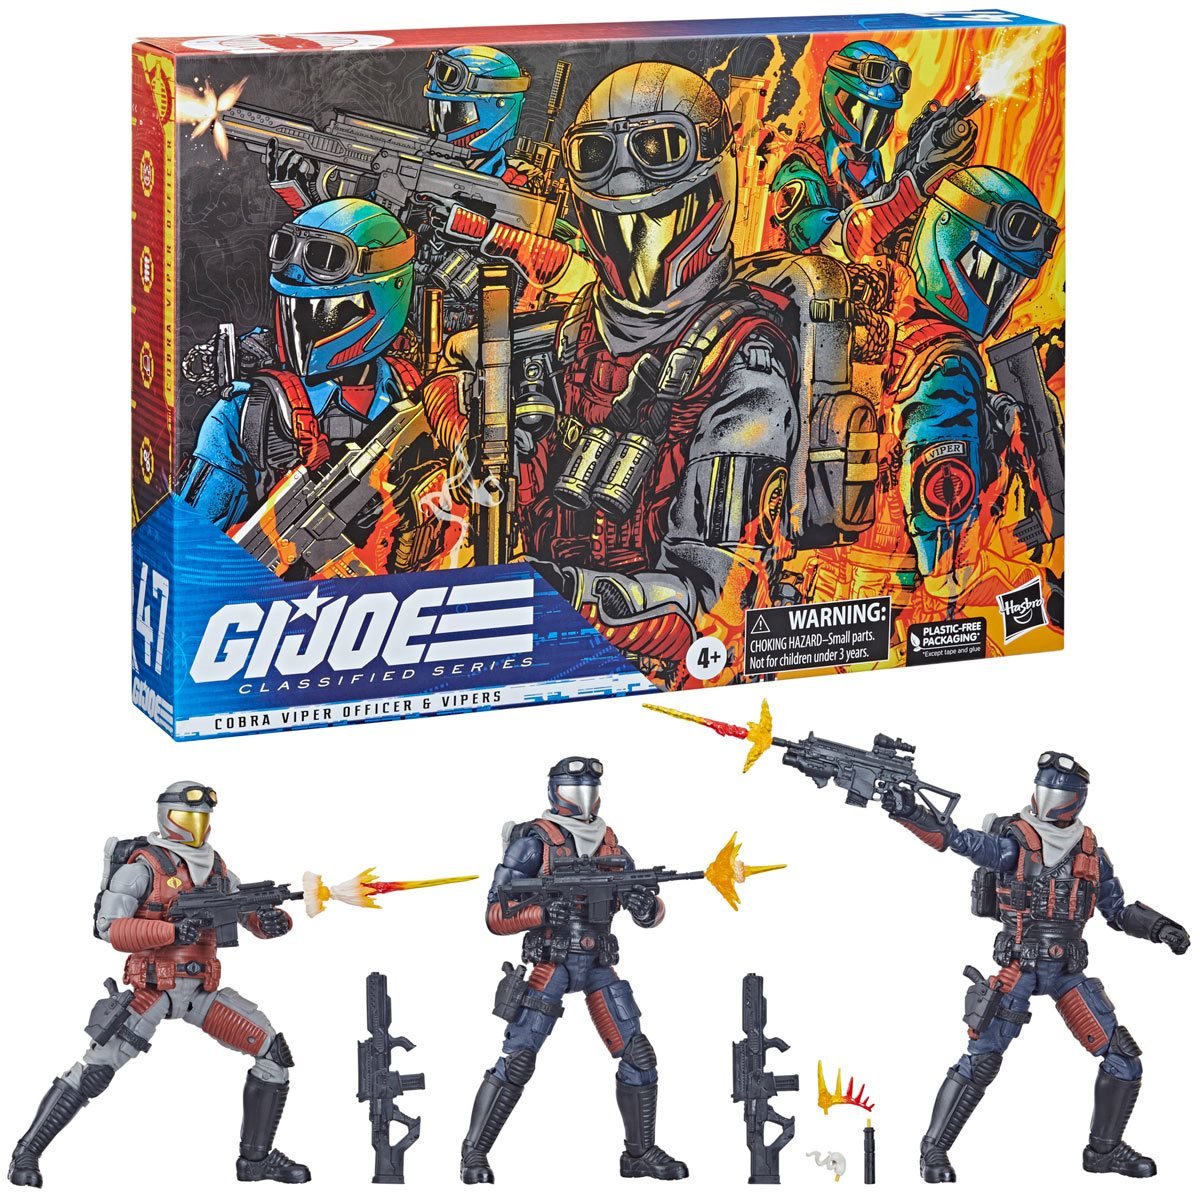 G.I. Joe Classified Series Vipers and Officer Troop Builder Pack Hasbro